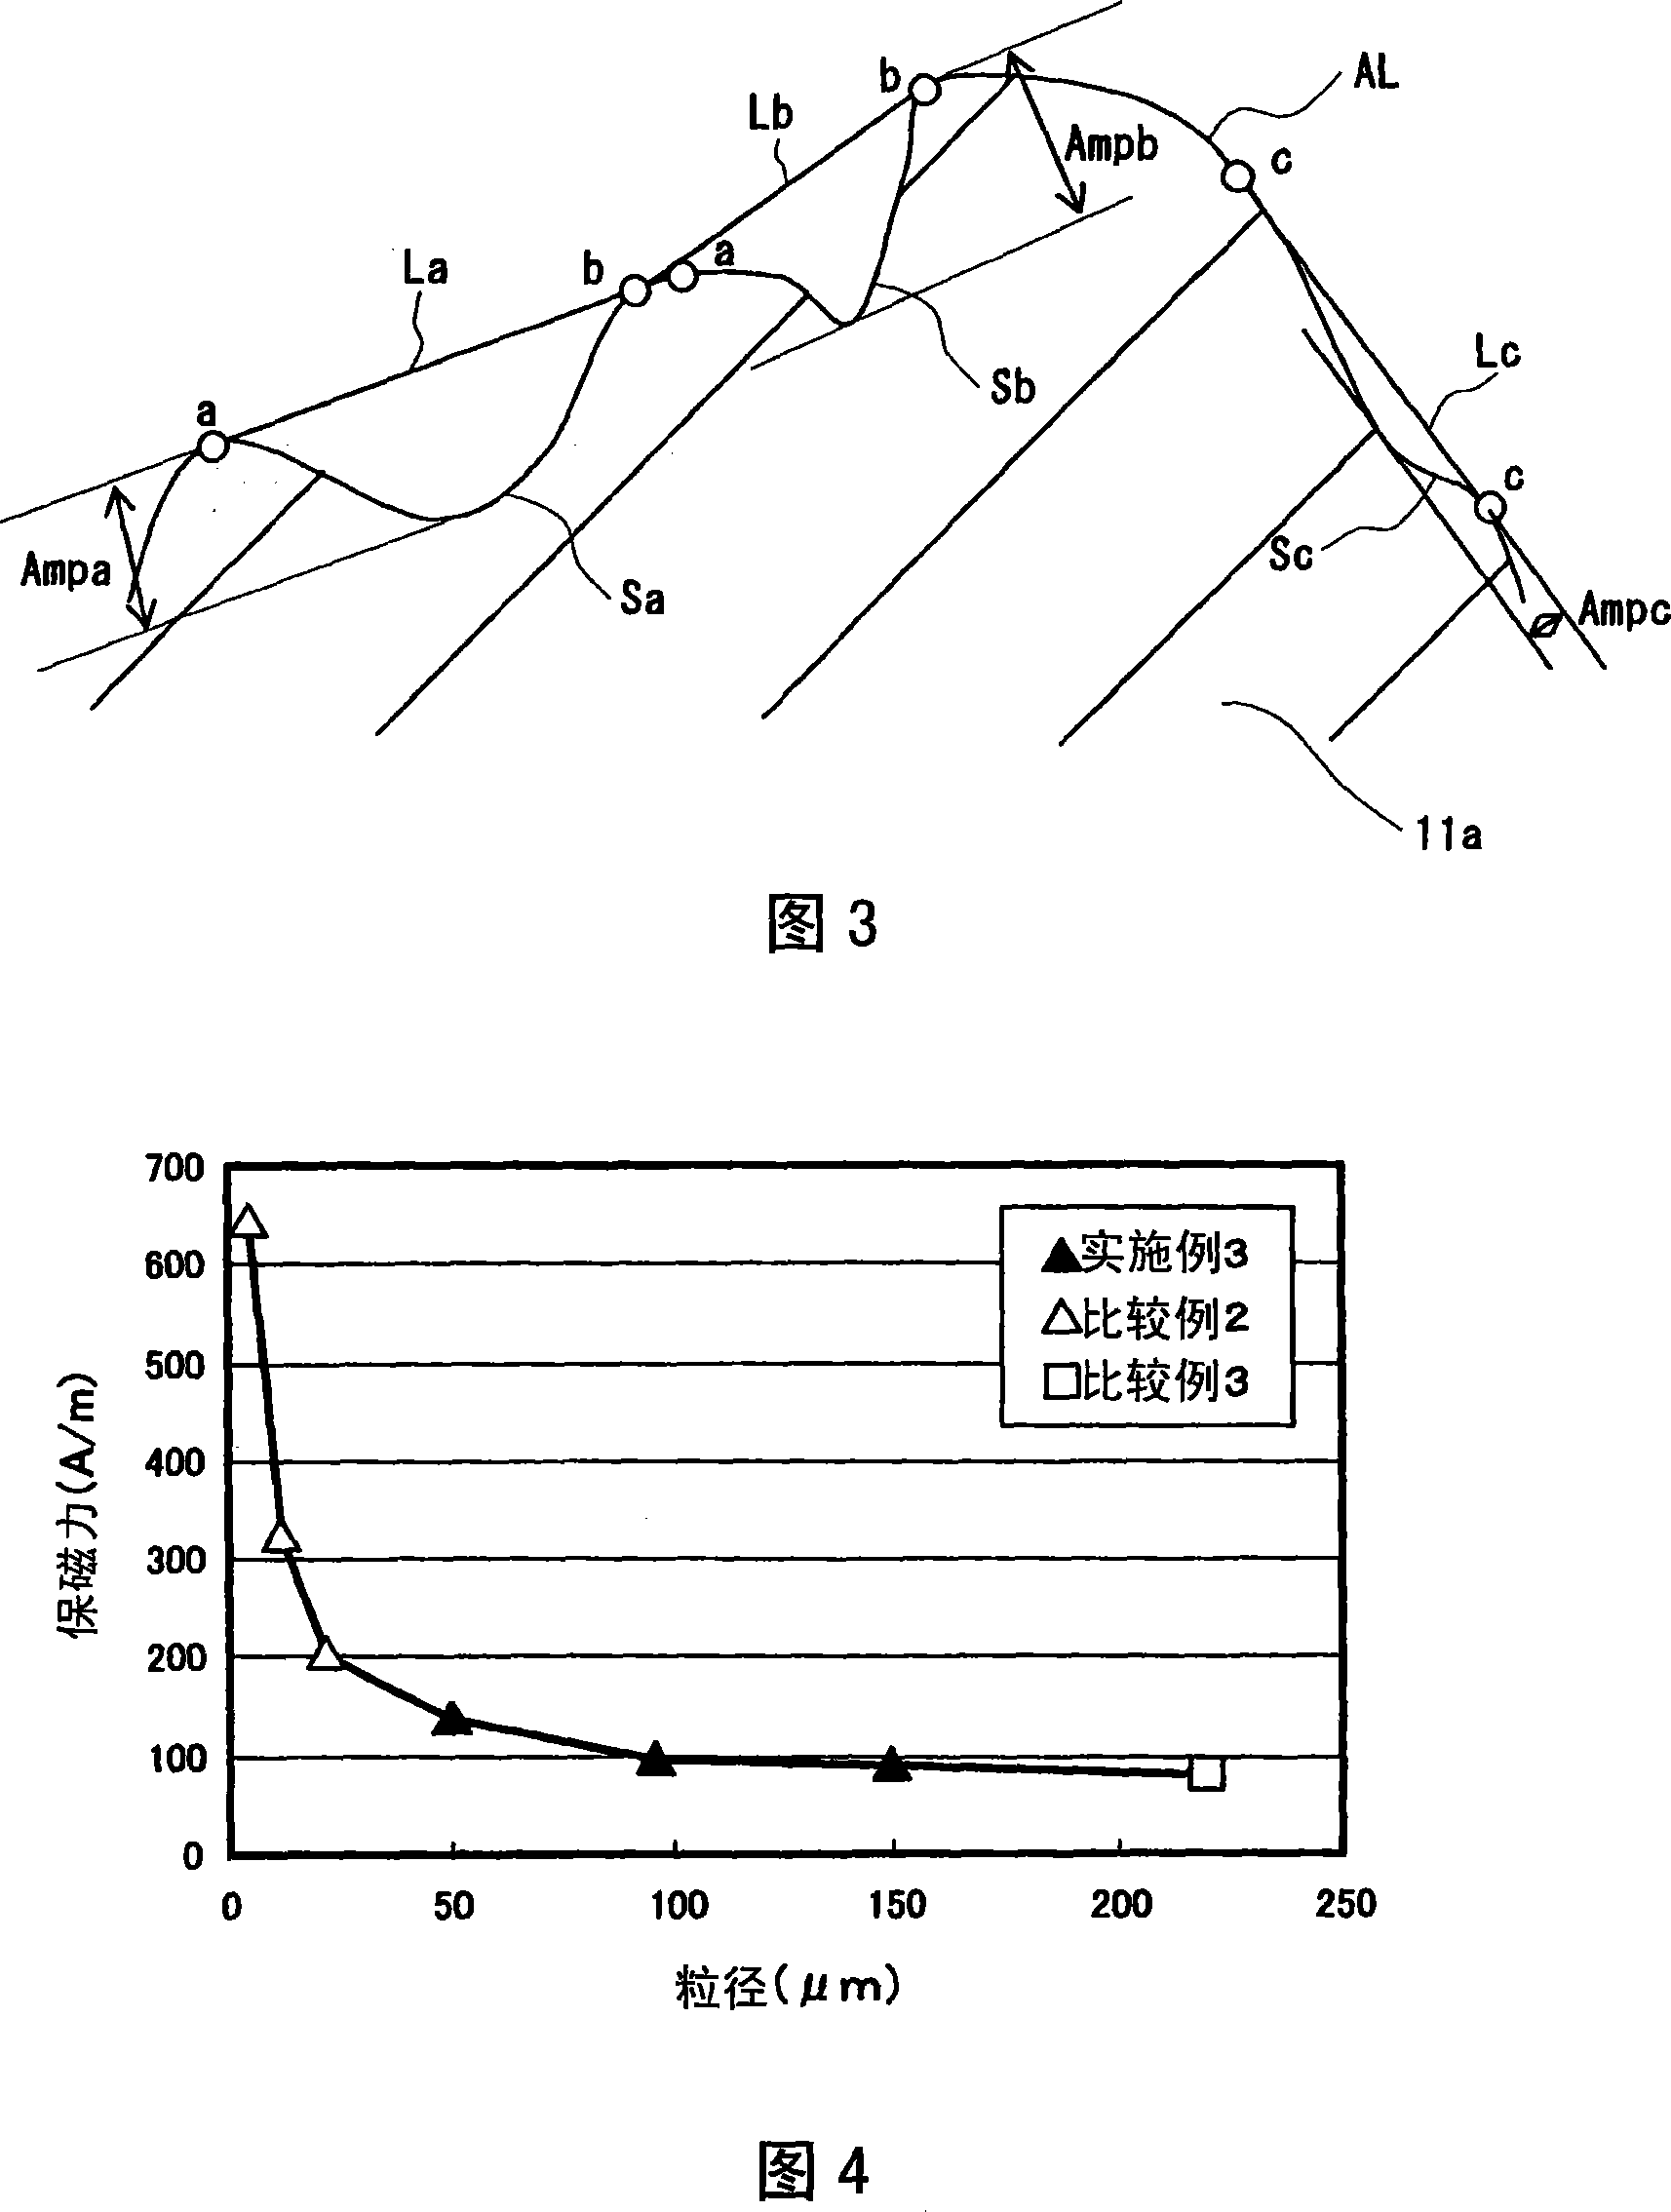 Magnetic power, method for manufacturing moulding powder and moulding powder